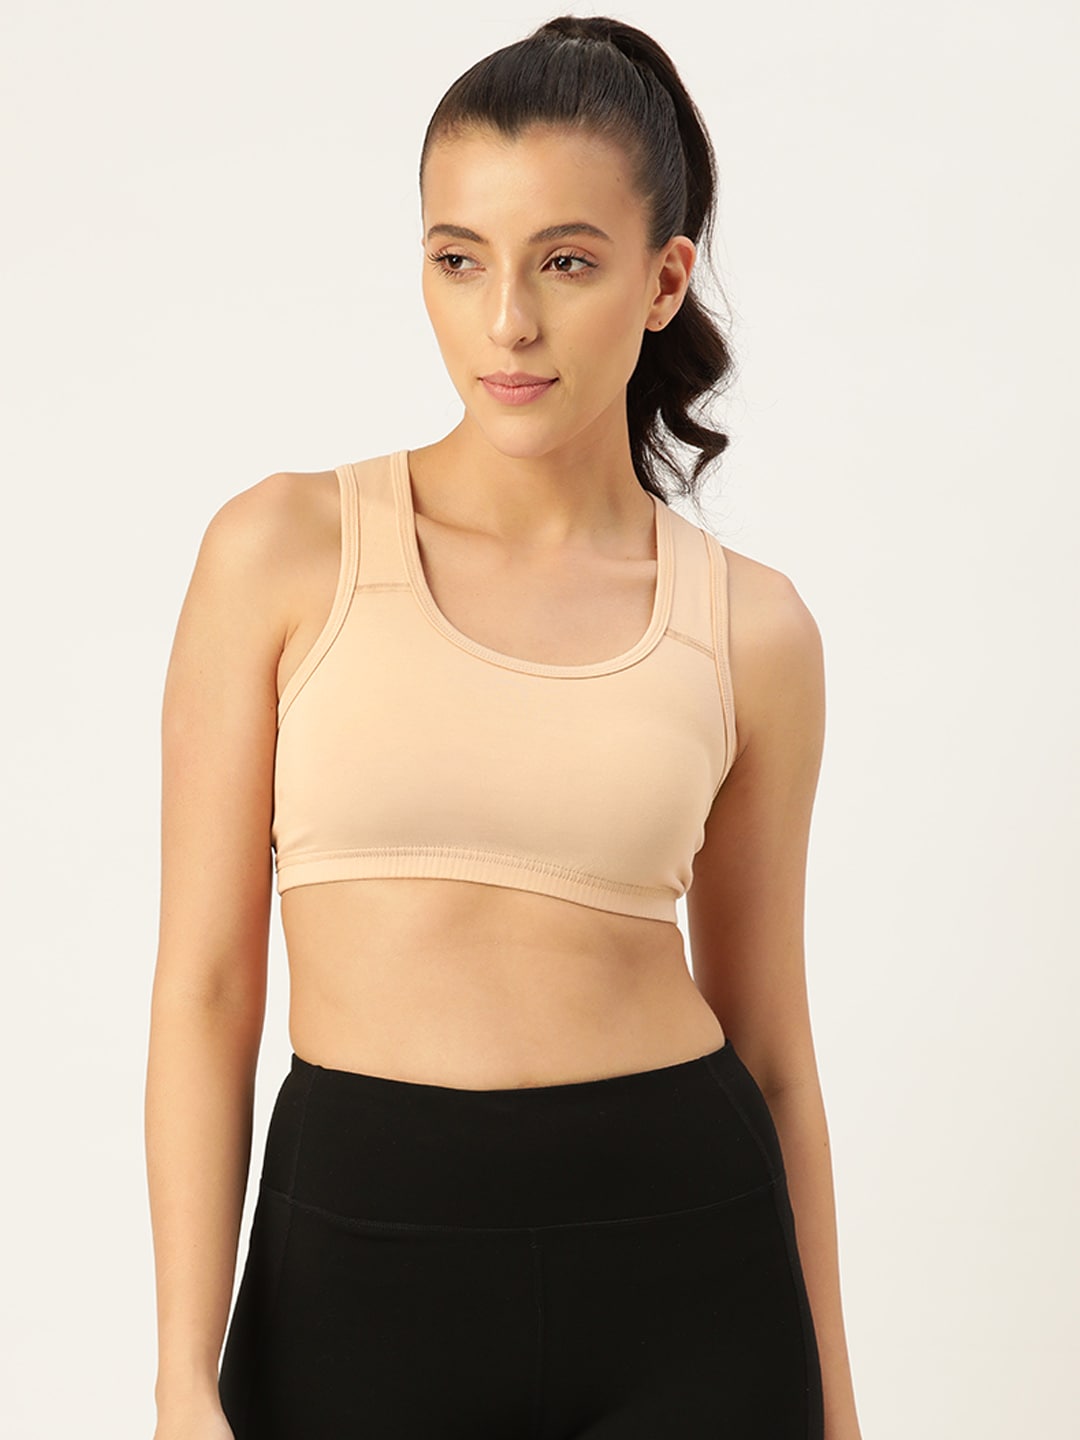 Leading Lady Beige Solid Sports Bra Price in India